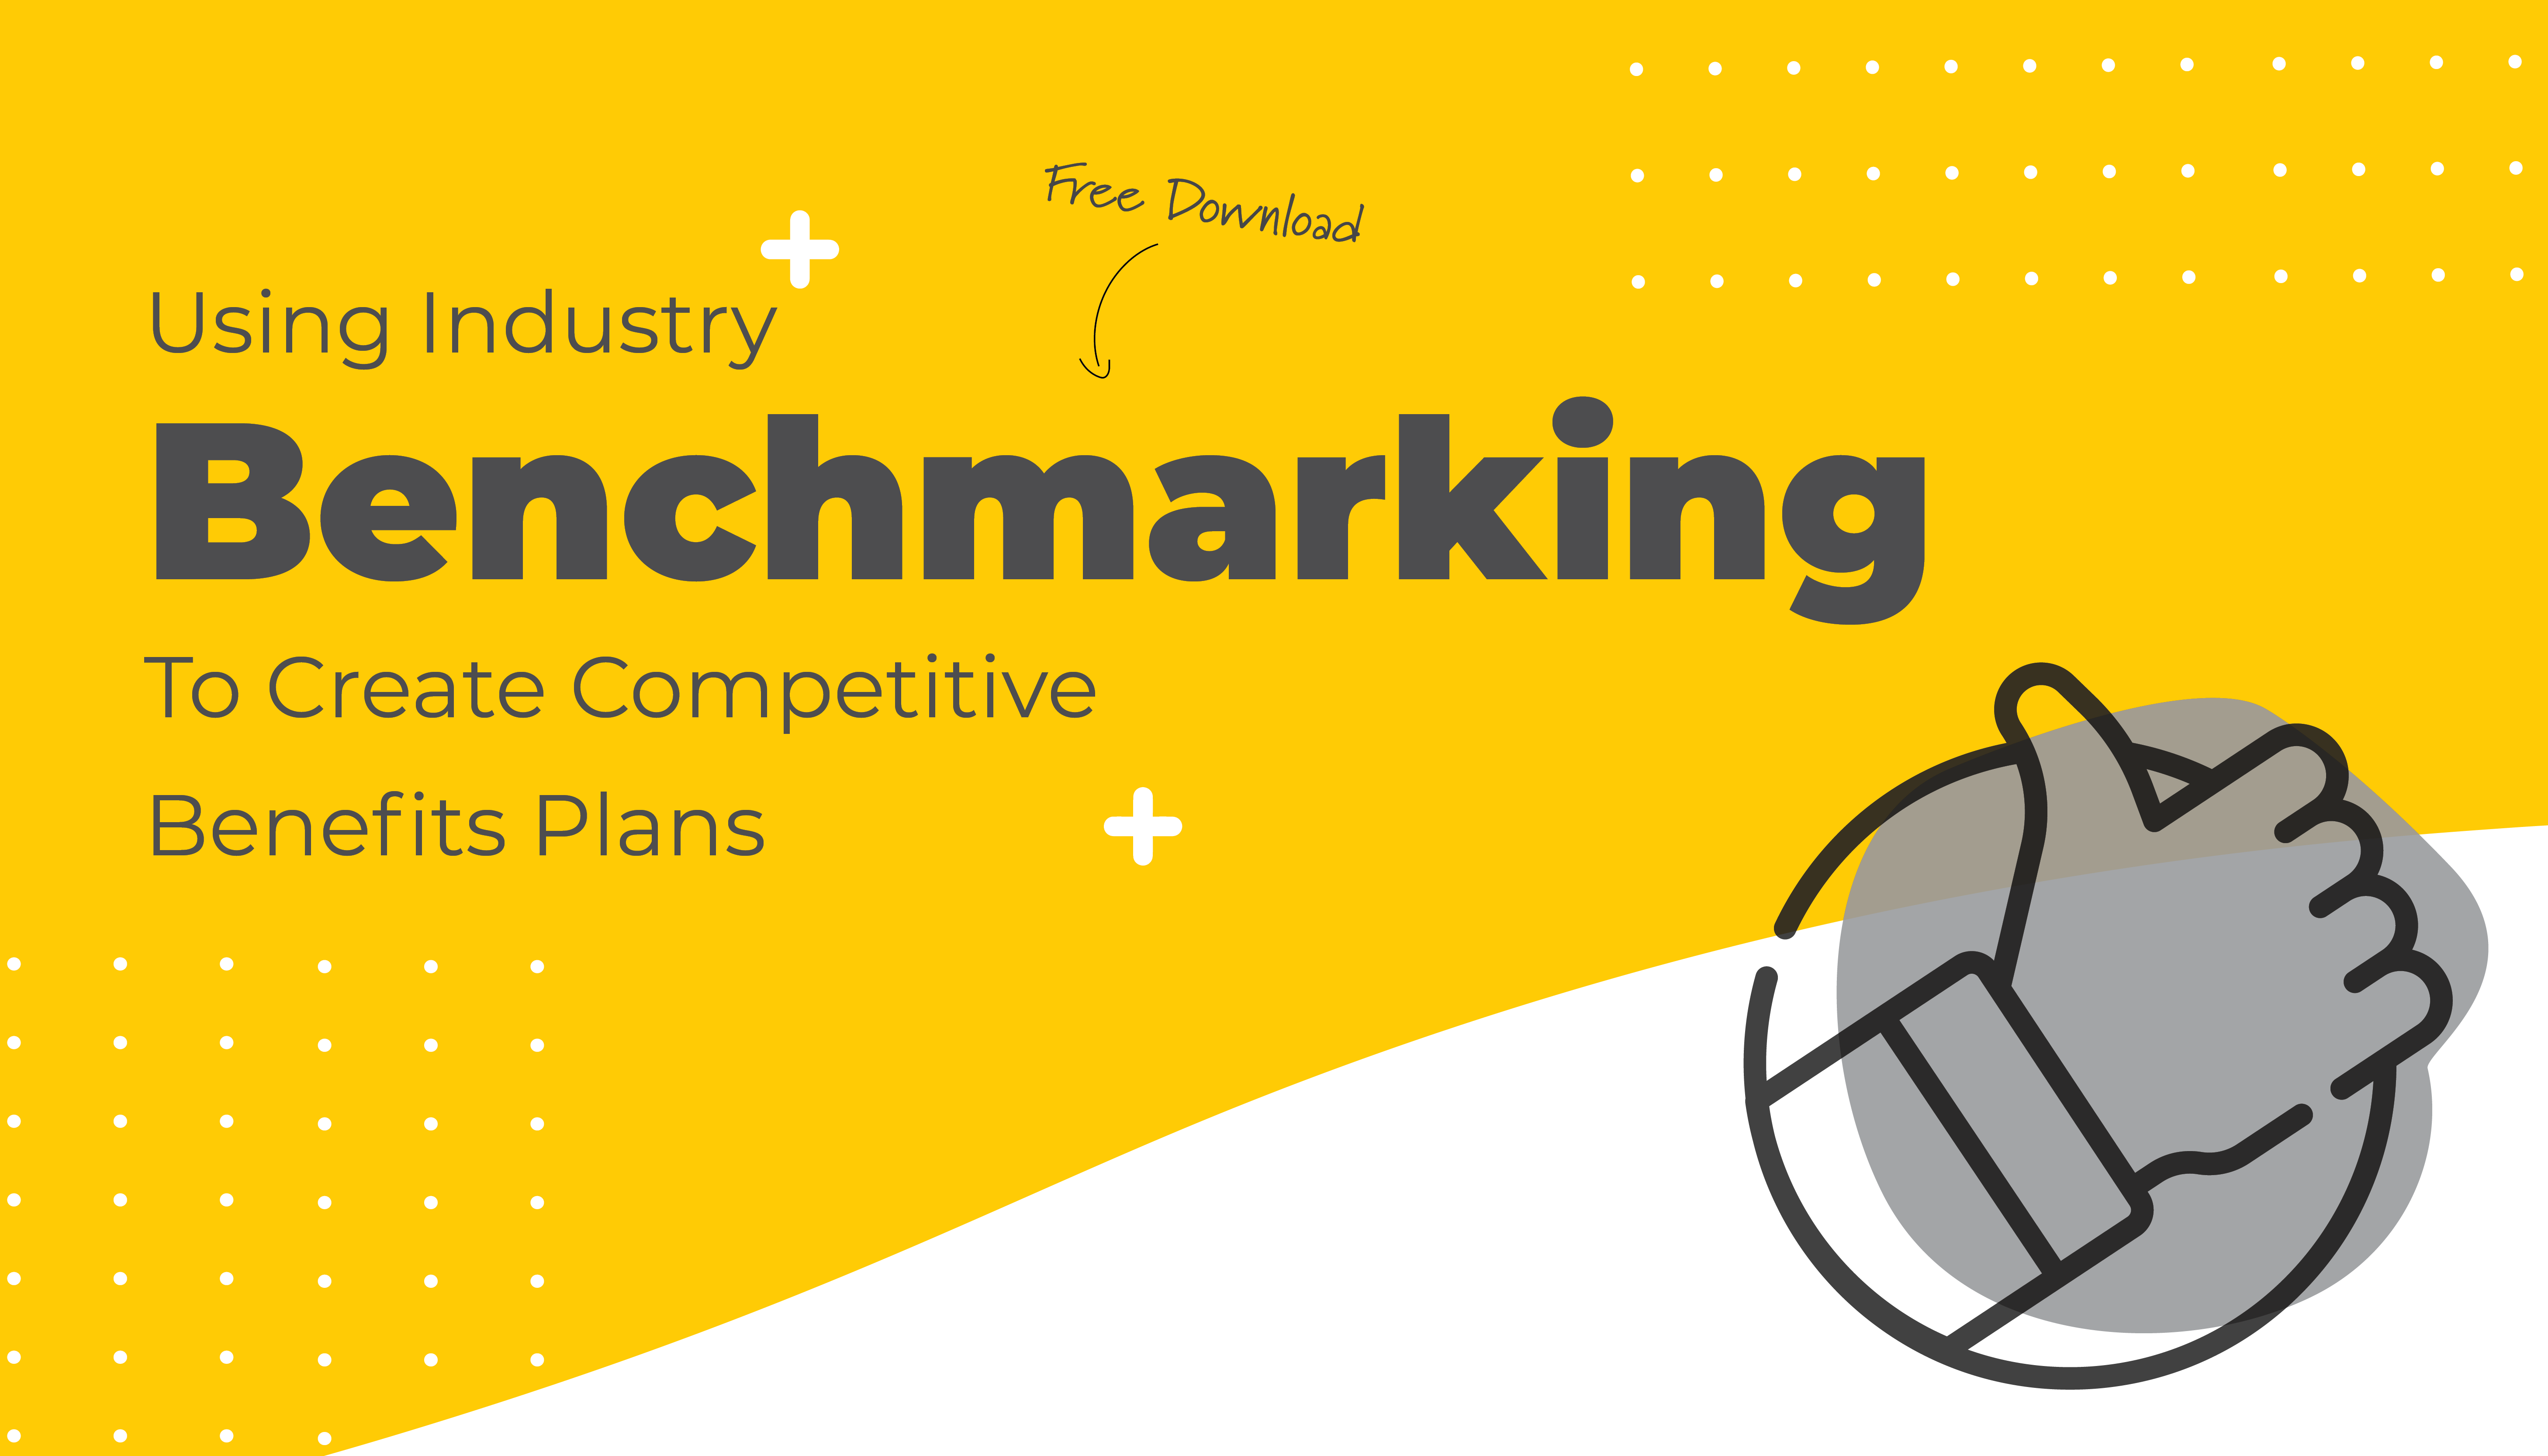 Using Industry Benchmarking to Create Competitive Benefits Plans | Benefits by Design